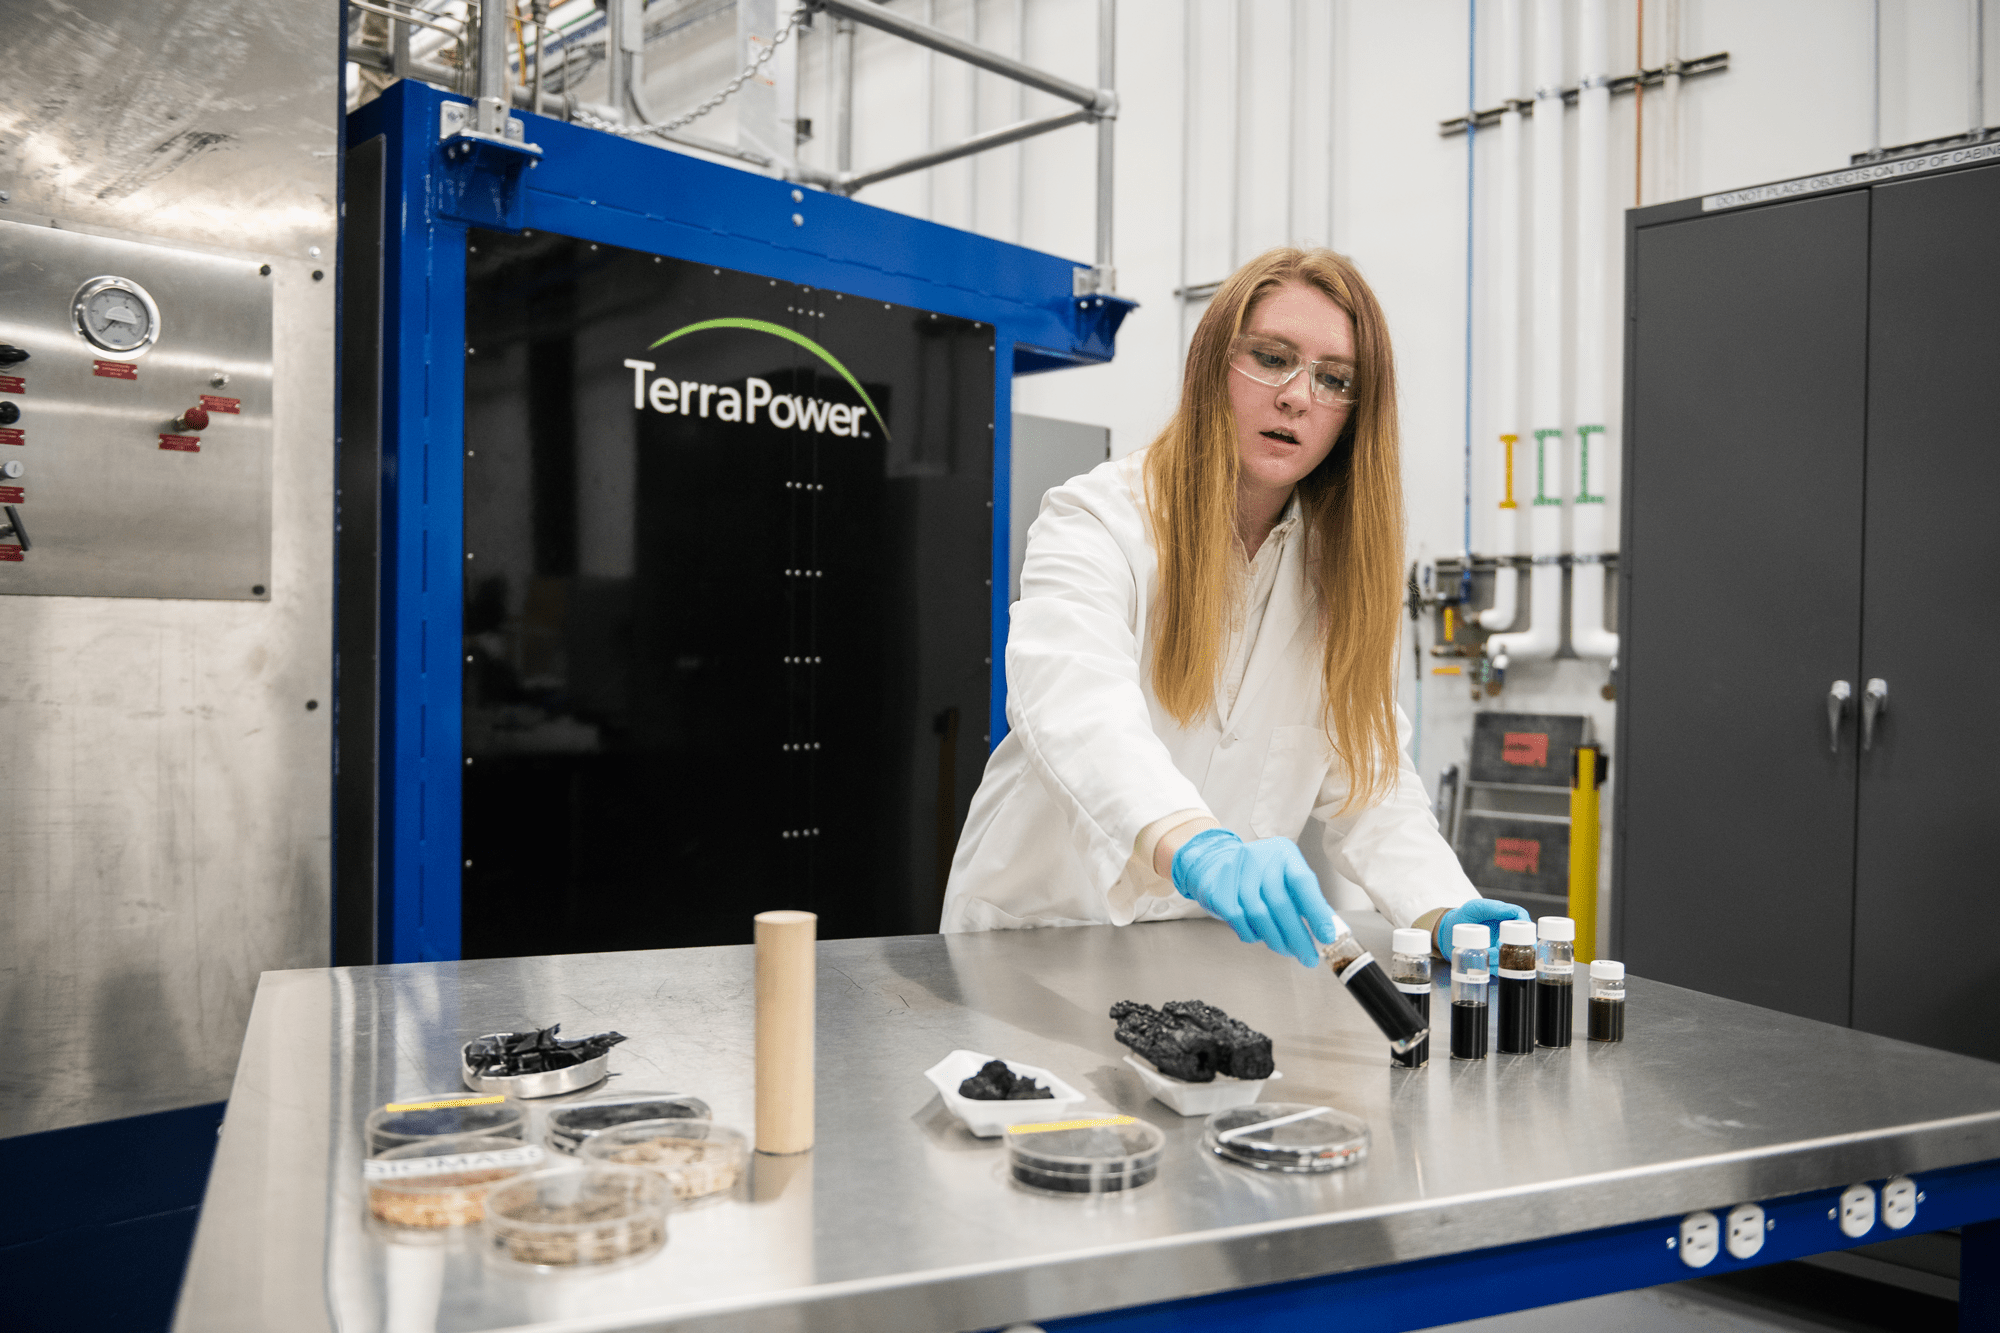 Working at TerraPower: Creating the Clean Energy Future